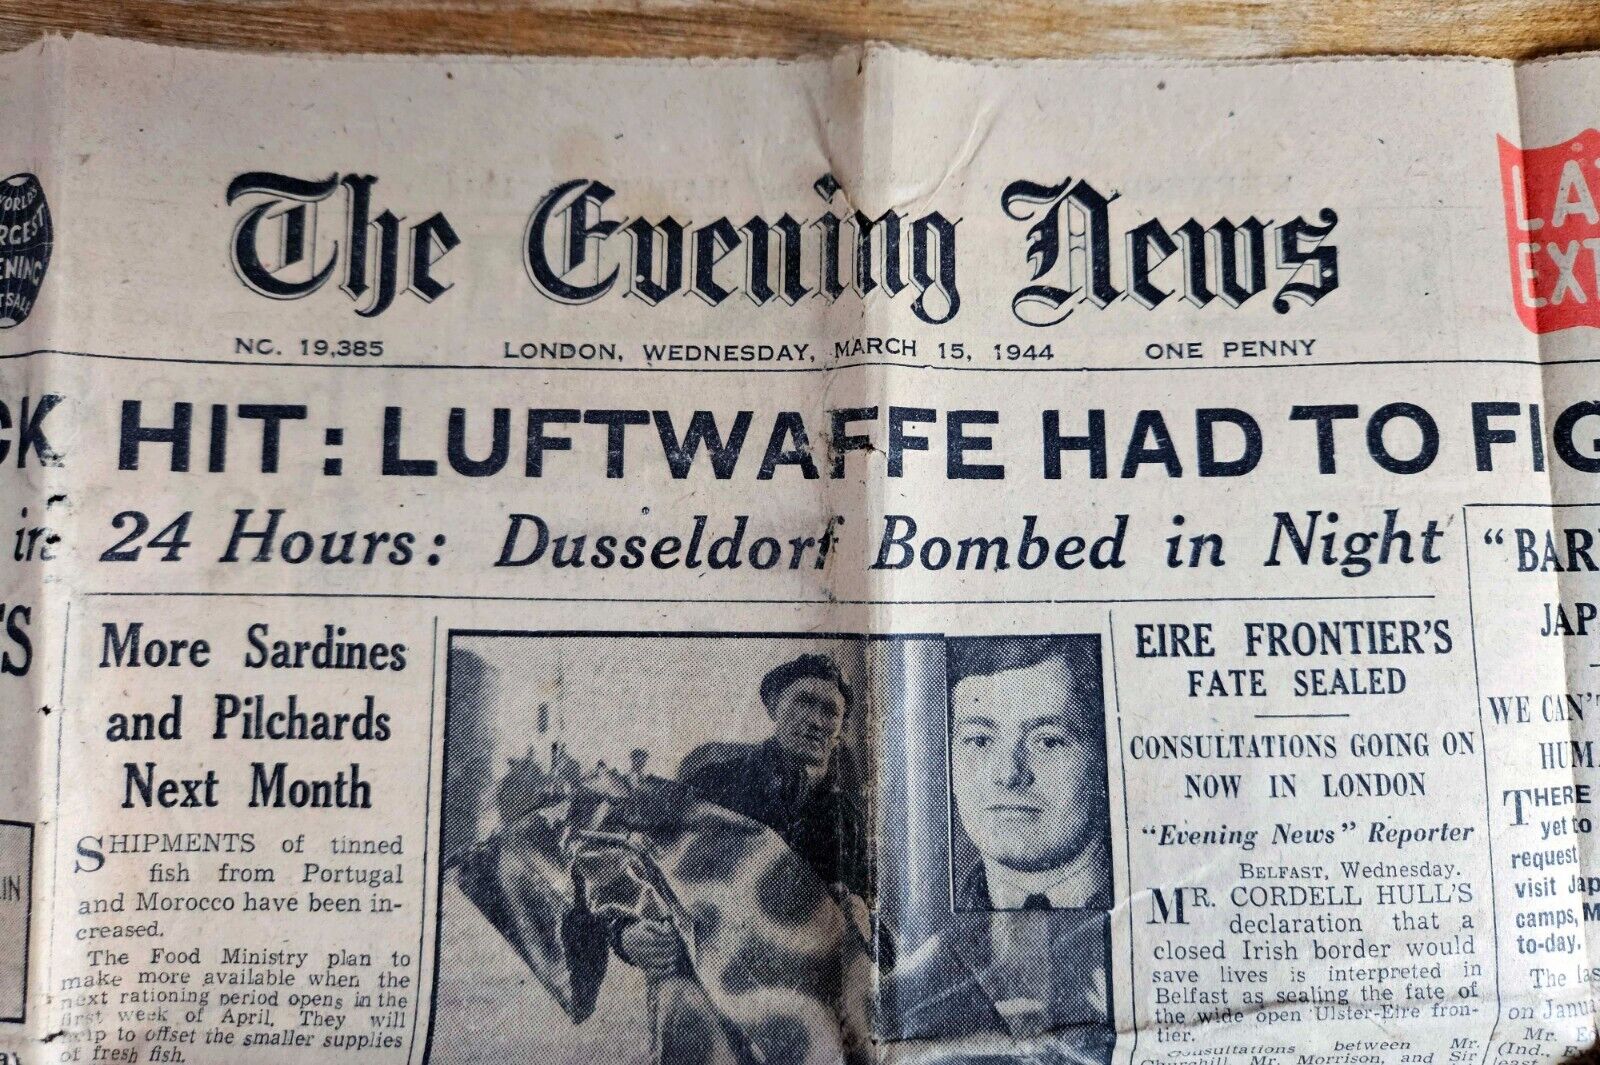 Rare London Evening News Late Extra 4 Broadsheet Pages Weds. March 15, 1944 WWII